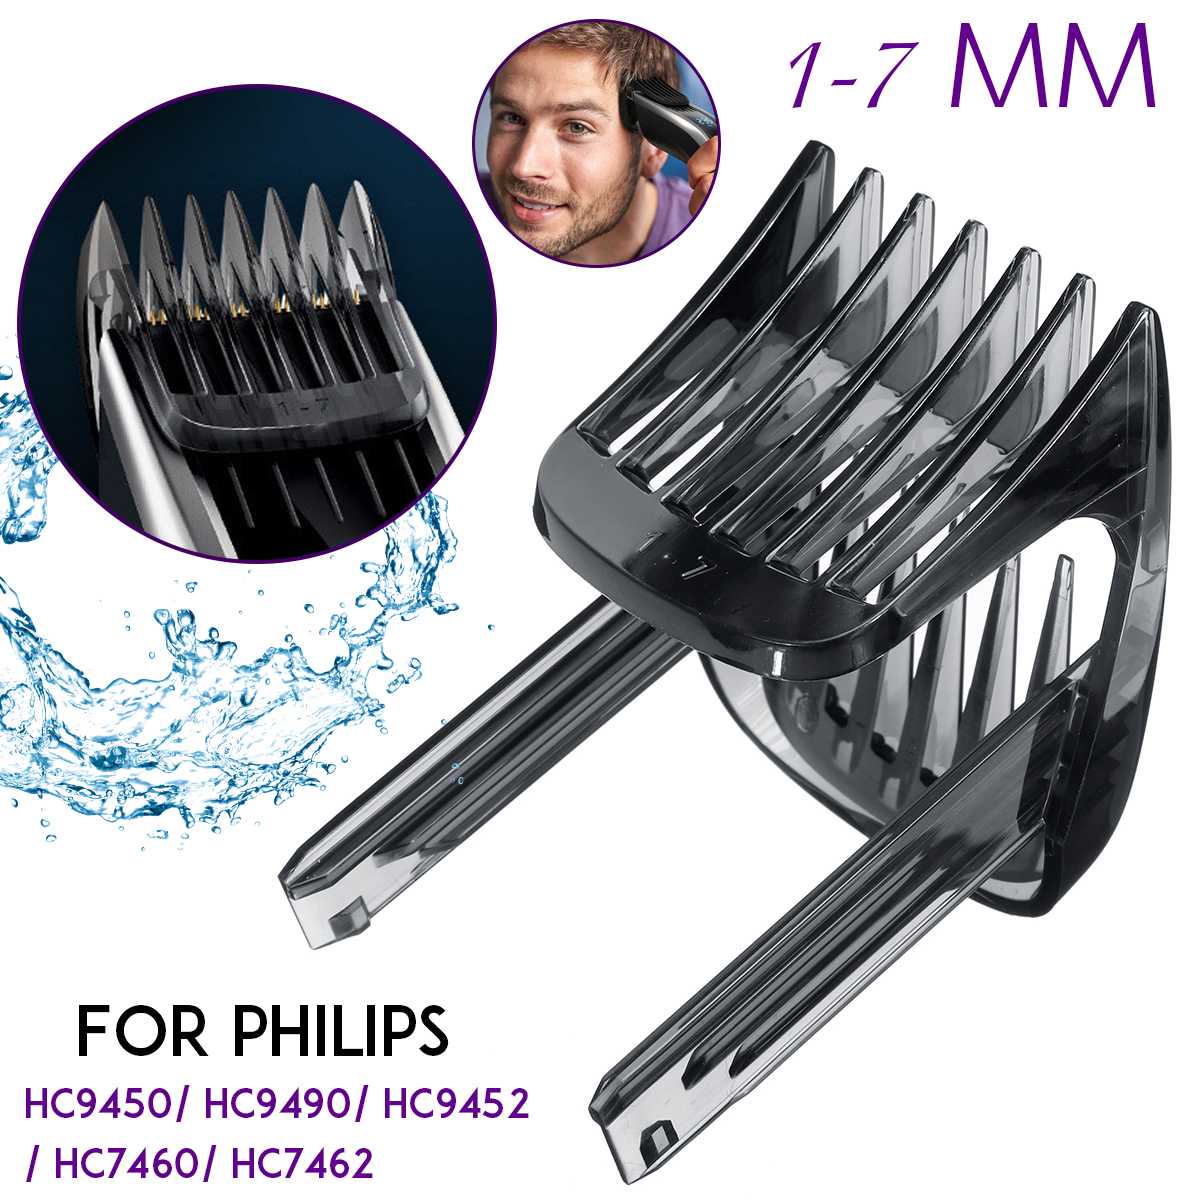 1pcs Hair Clipper Comb for Philips HC9450 HC9490 HC9452 HC7460 HC7462 Hair Trimmer 1-7mm Replacement Comb